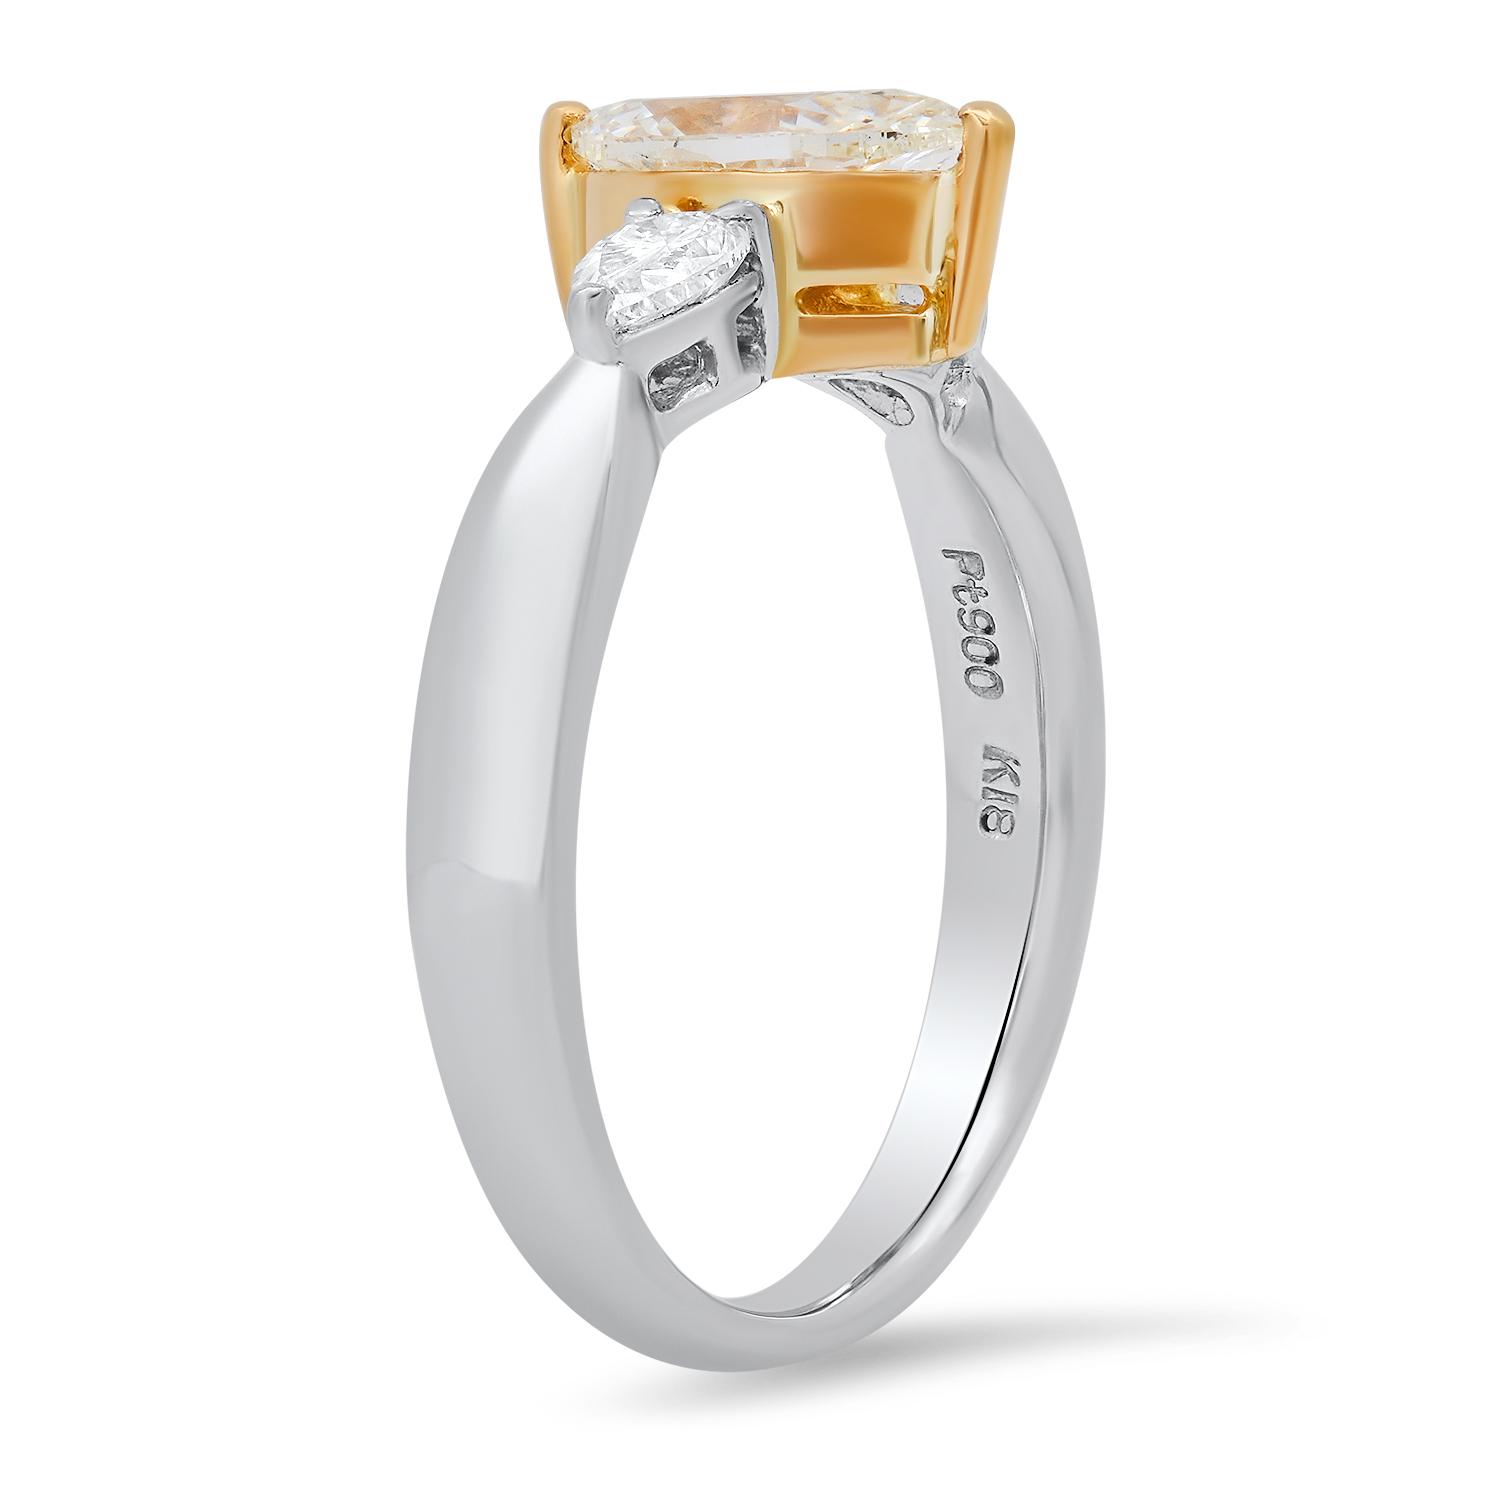 Platinum and 18K Yellow Gold Setting with 0.42ct Center Diamond and 0.77tcw Diamond Ring